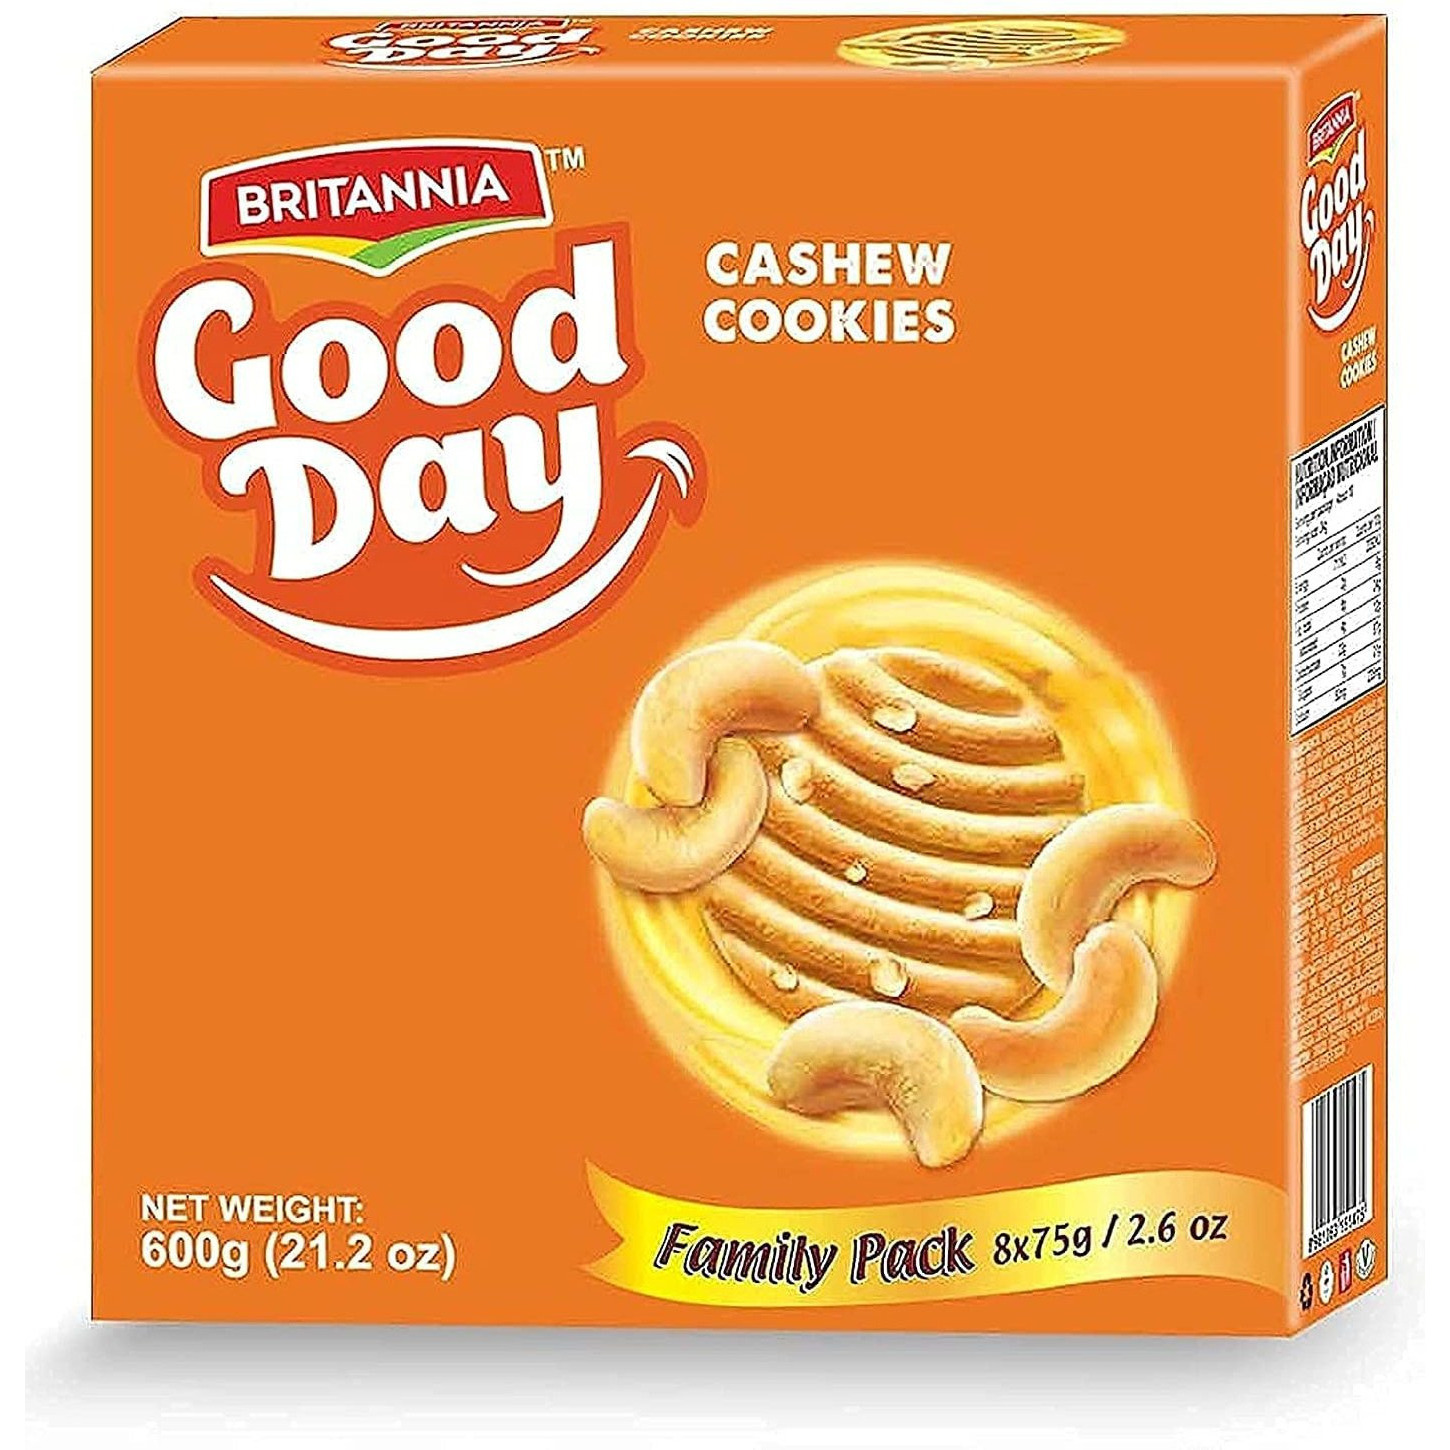 Pack of 5 - Britannia Good Day Cashew Cookies Family Pack - 600 Gm (1.3 Lb)